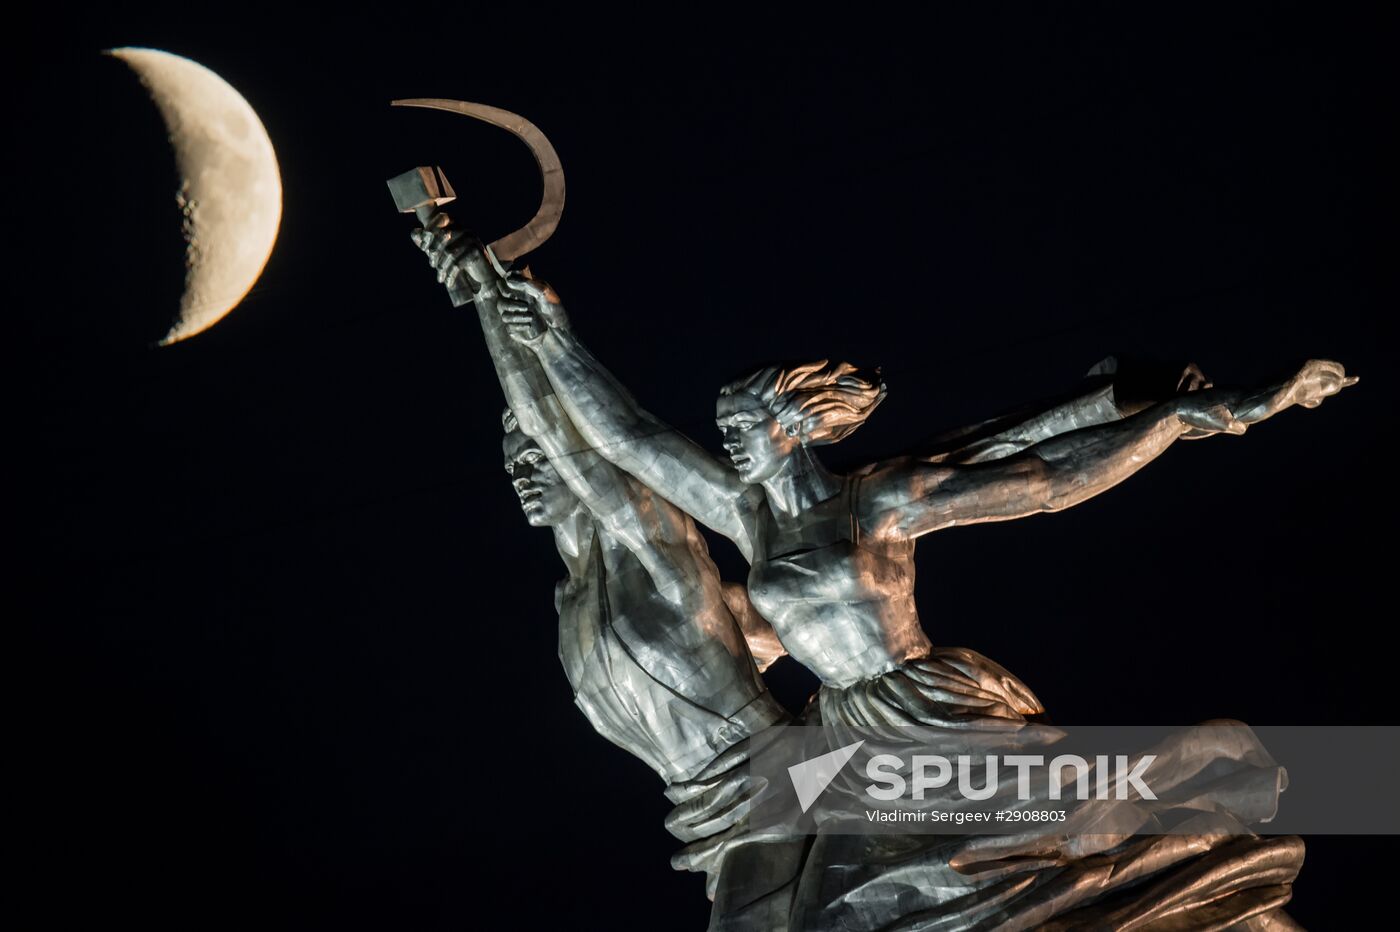 Worker and Collective Farm Woman monument and waxing moon in Moscow